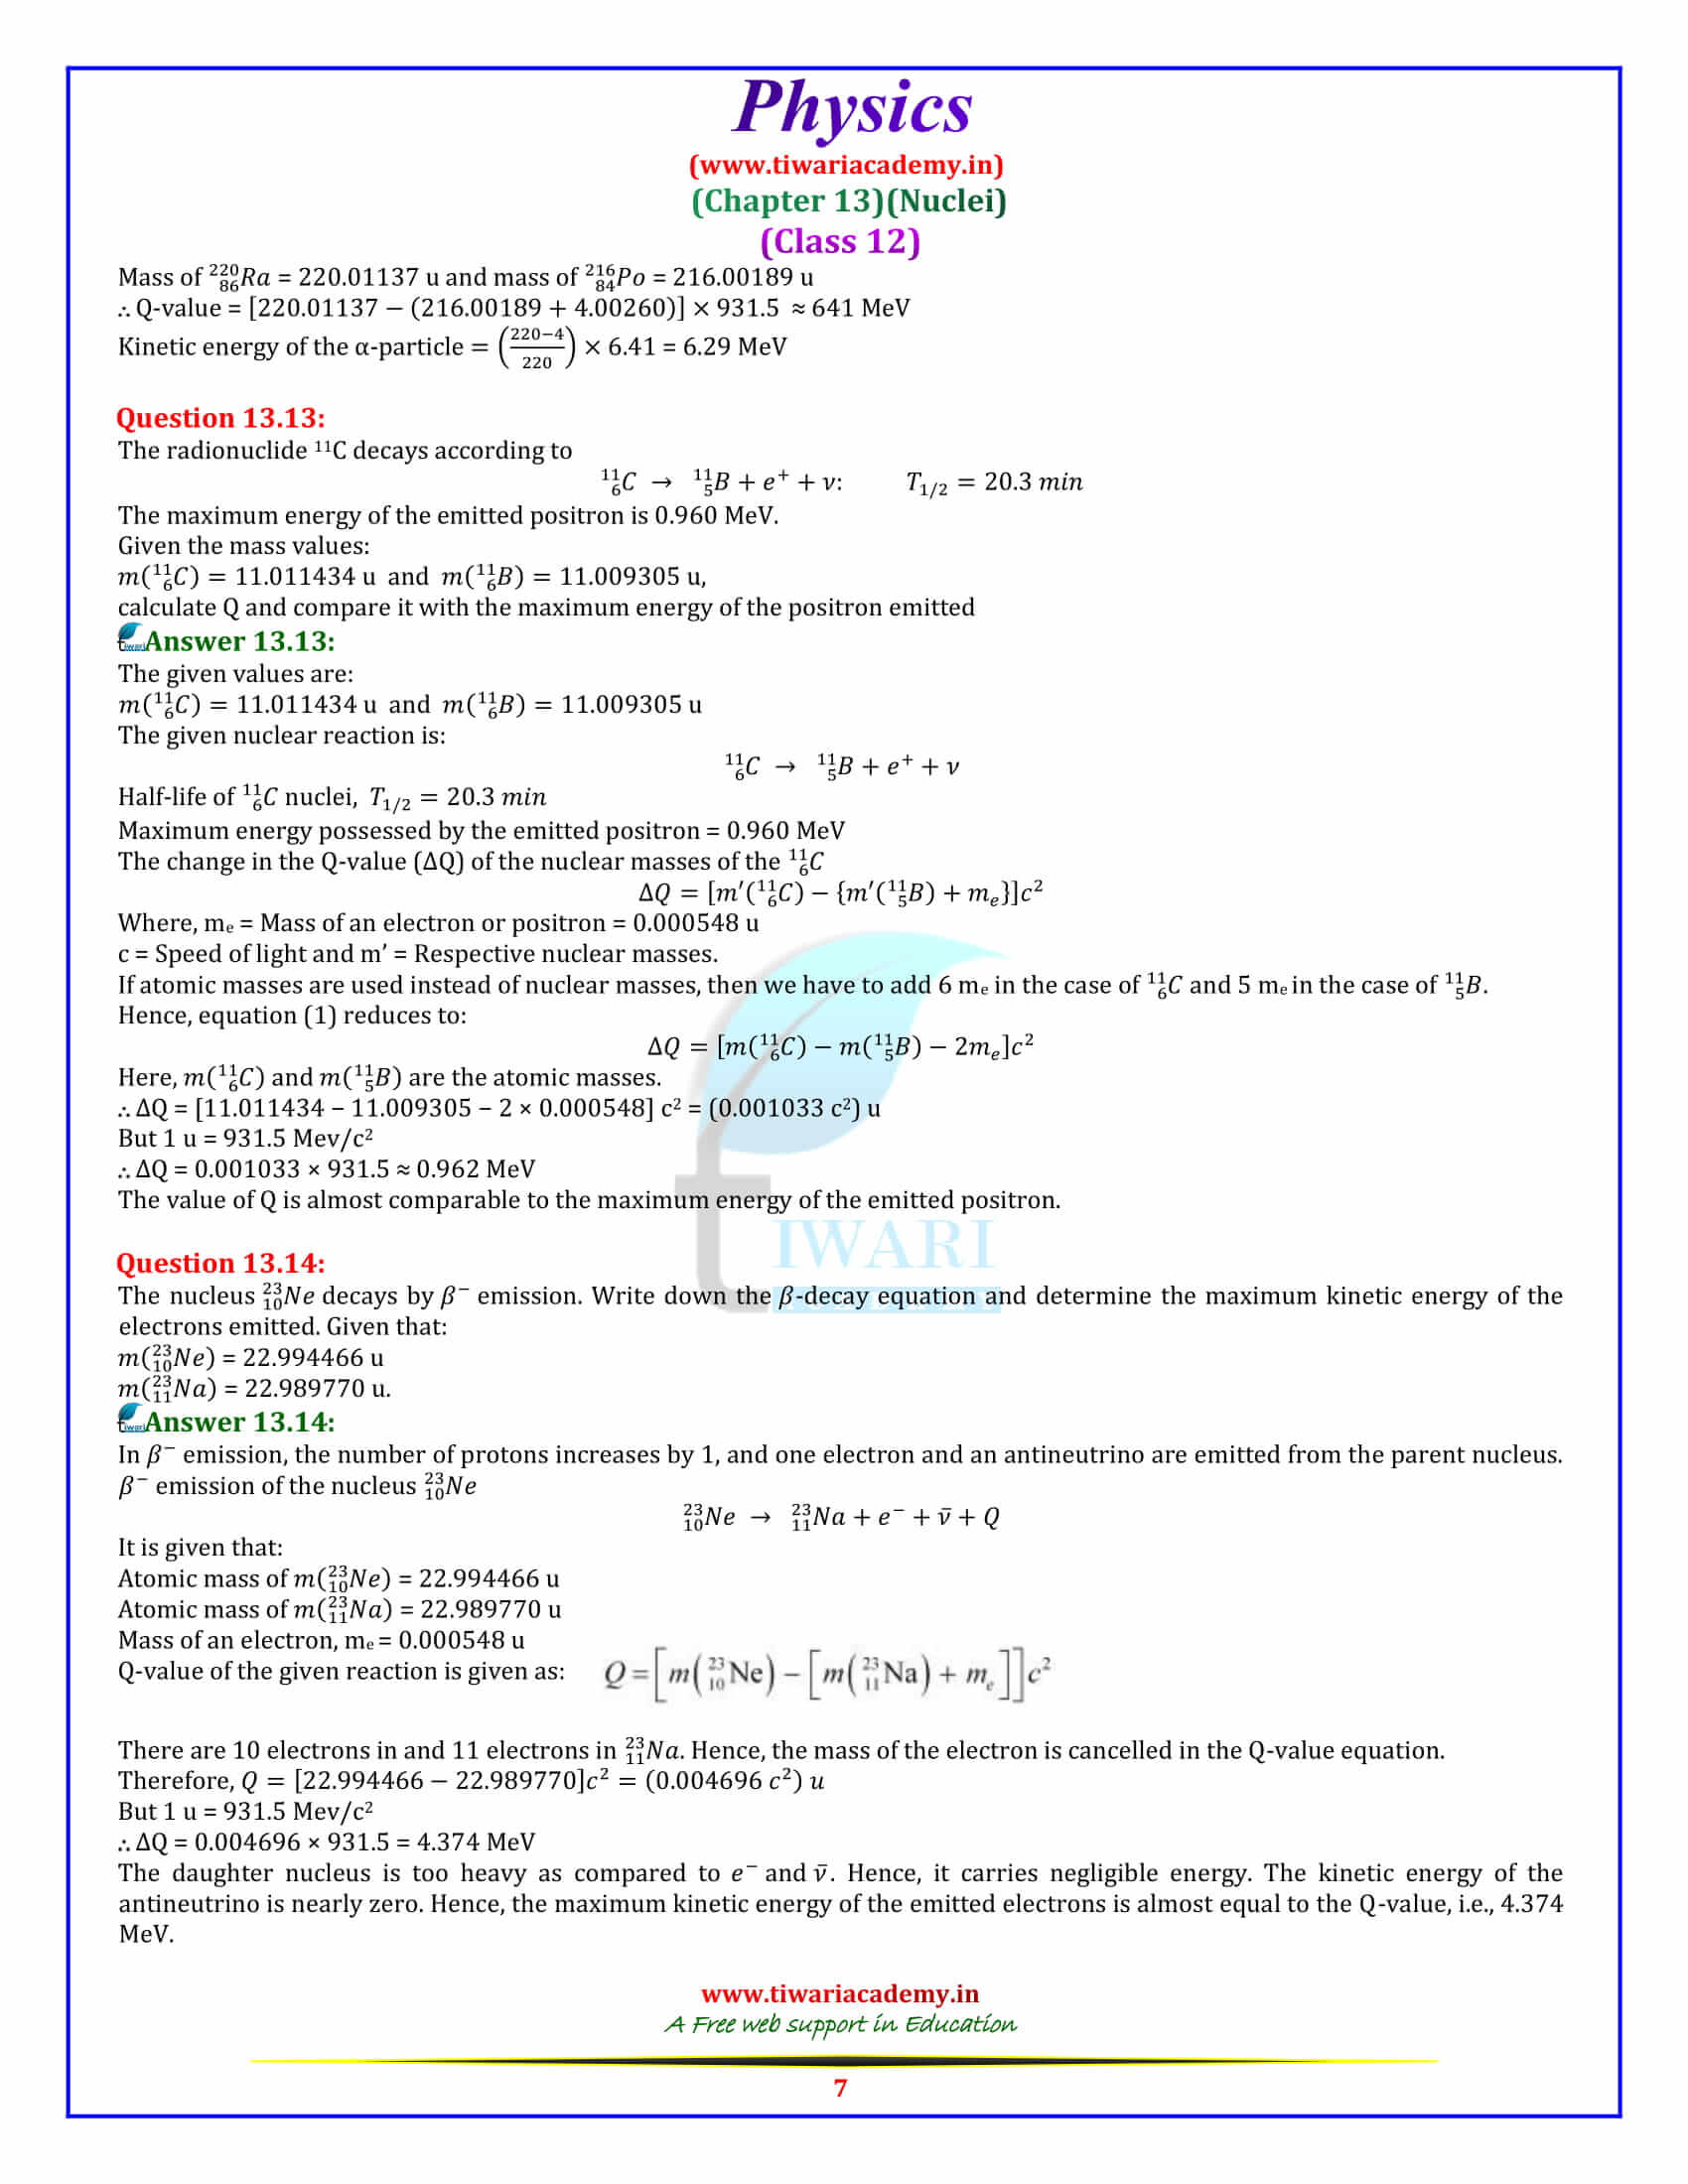 NCERT Solutions for Class 12 Physics Chapter 13